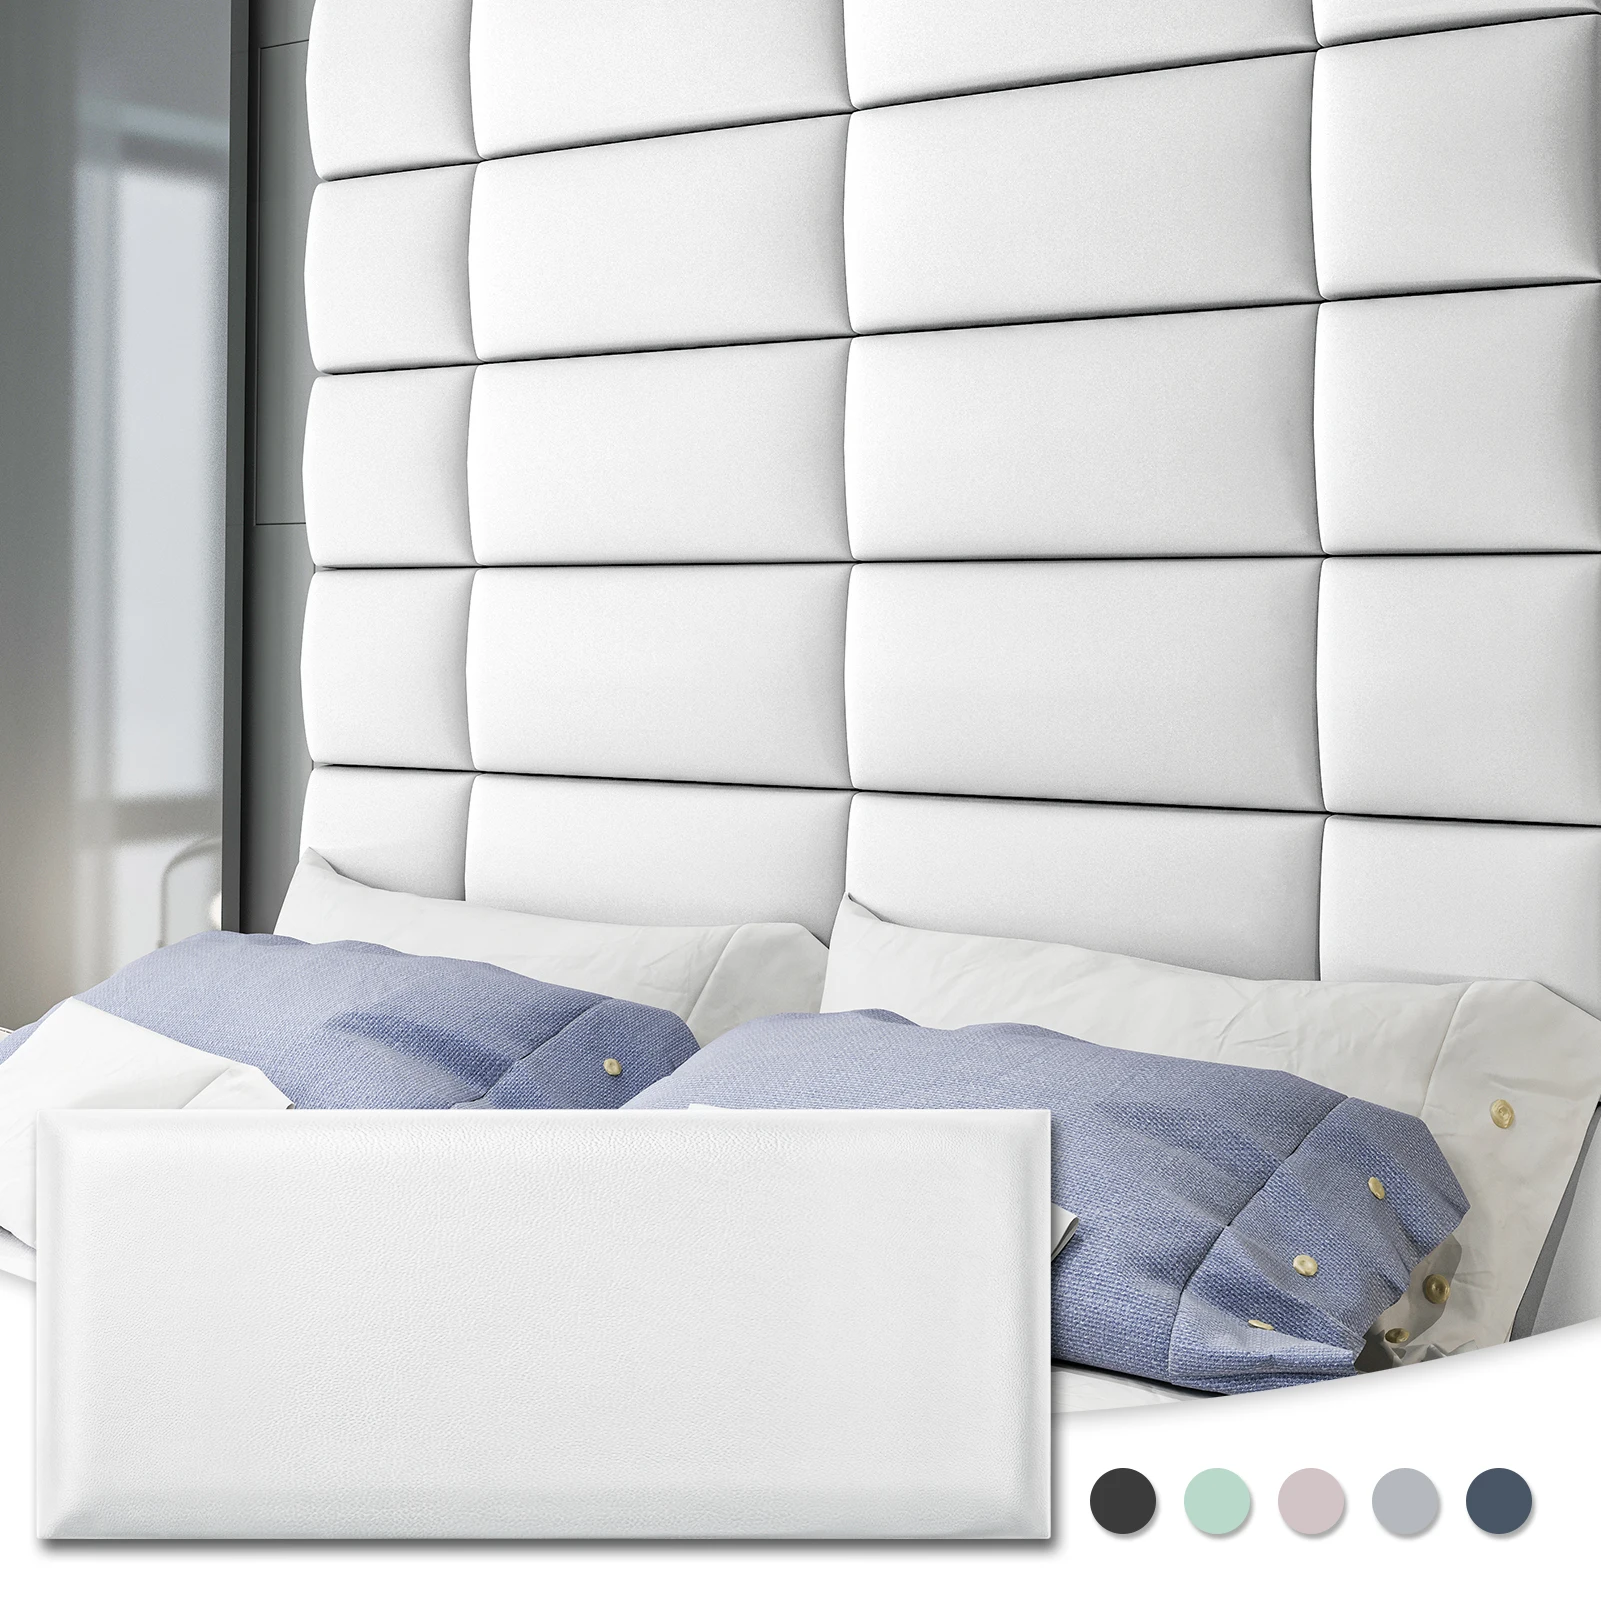 Art3d Adjustable Wall Mounted Upholstered Headboard,Interchangeable Bed Panels in White(6 Panels, 9.84